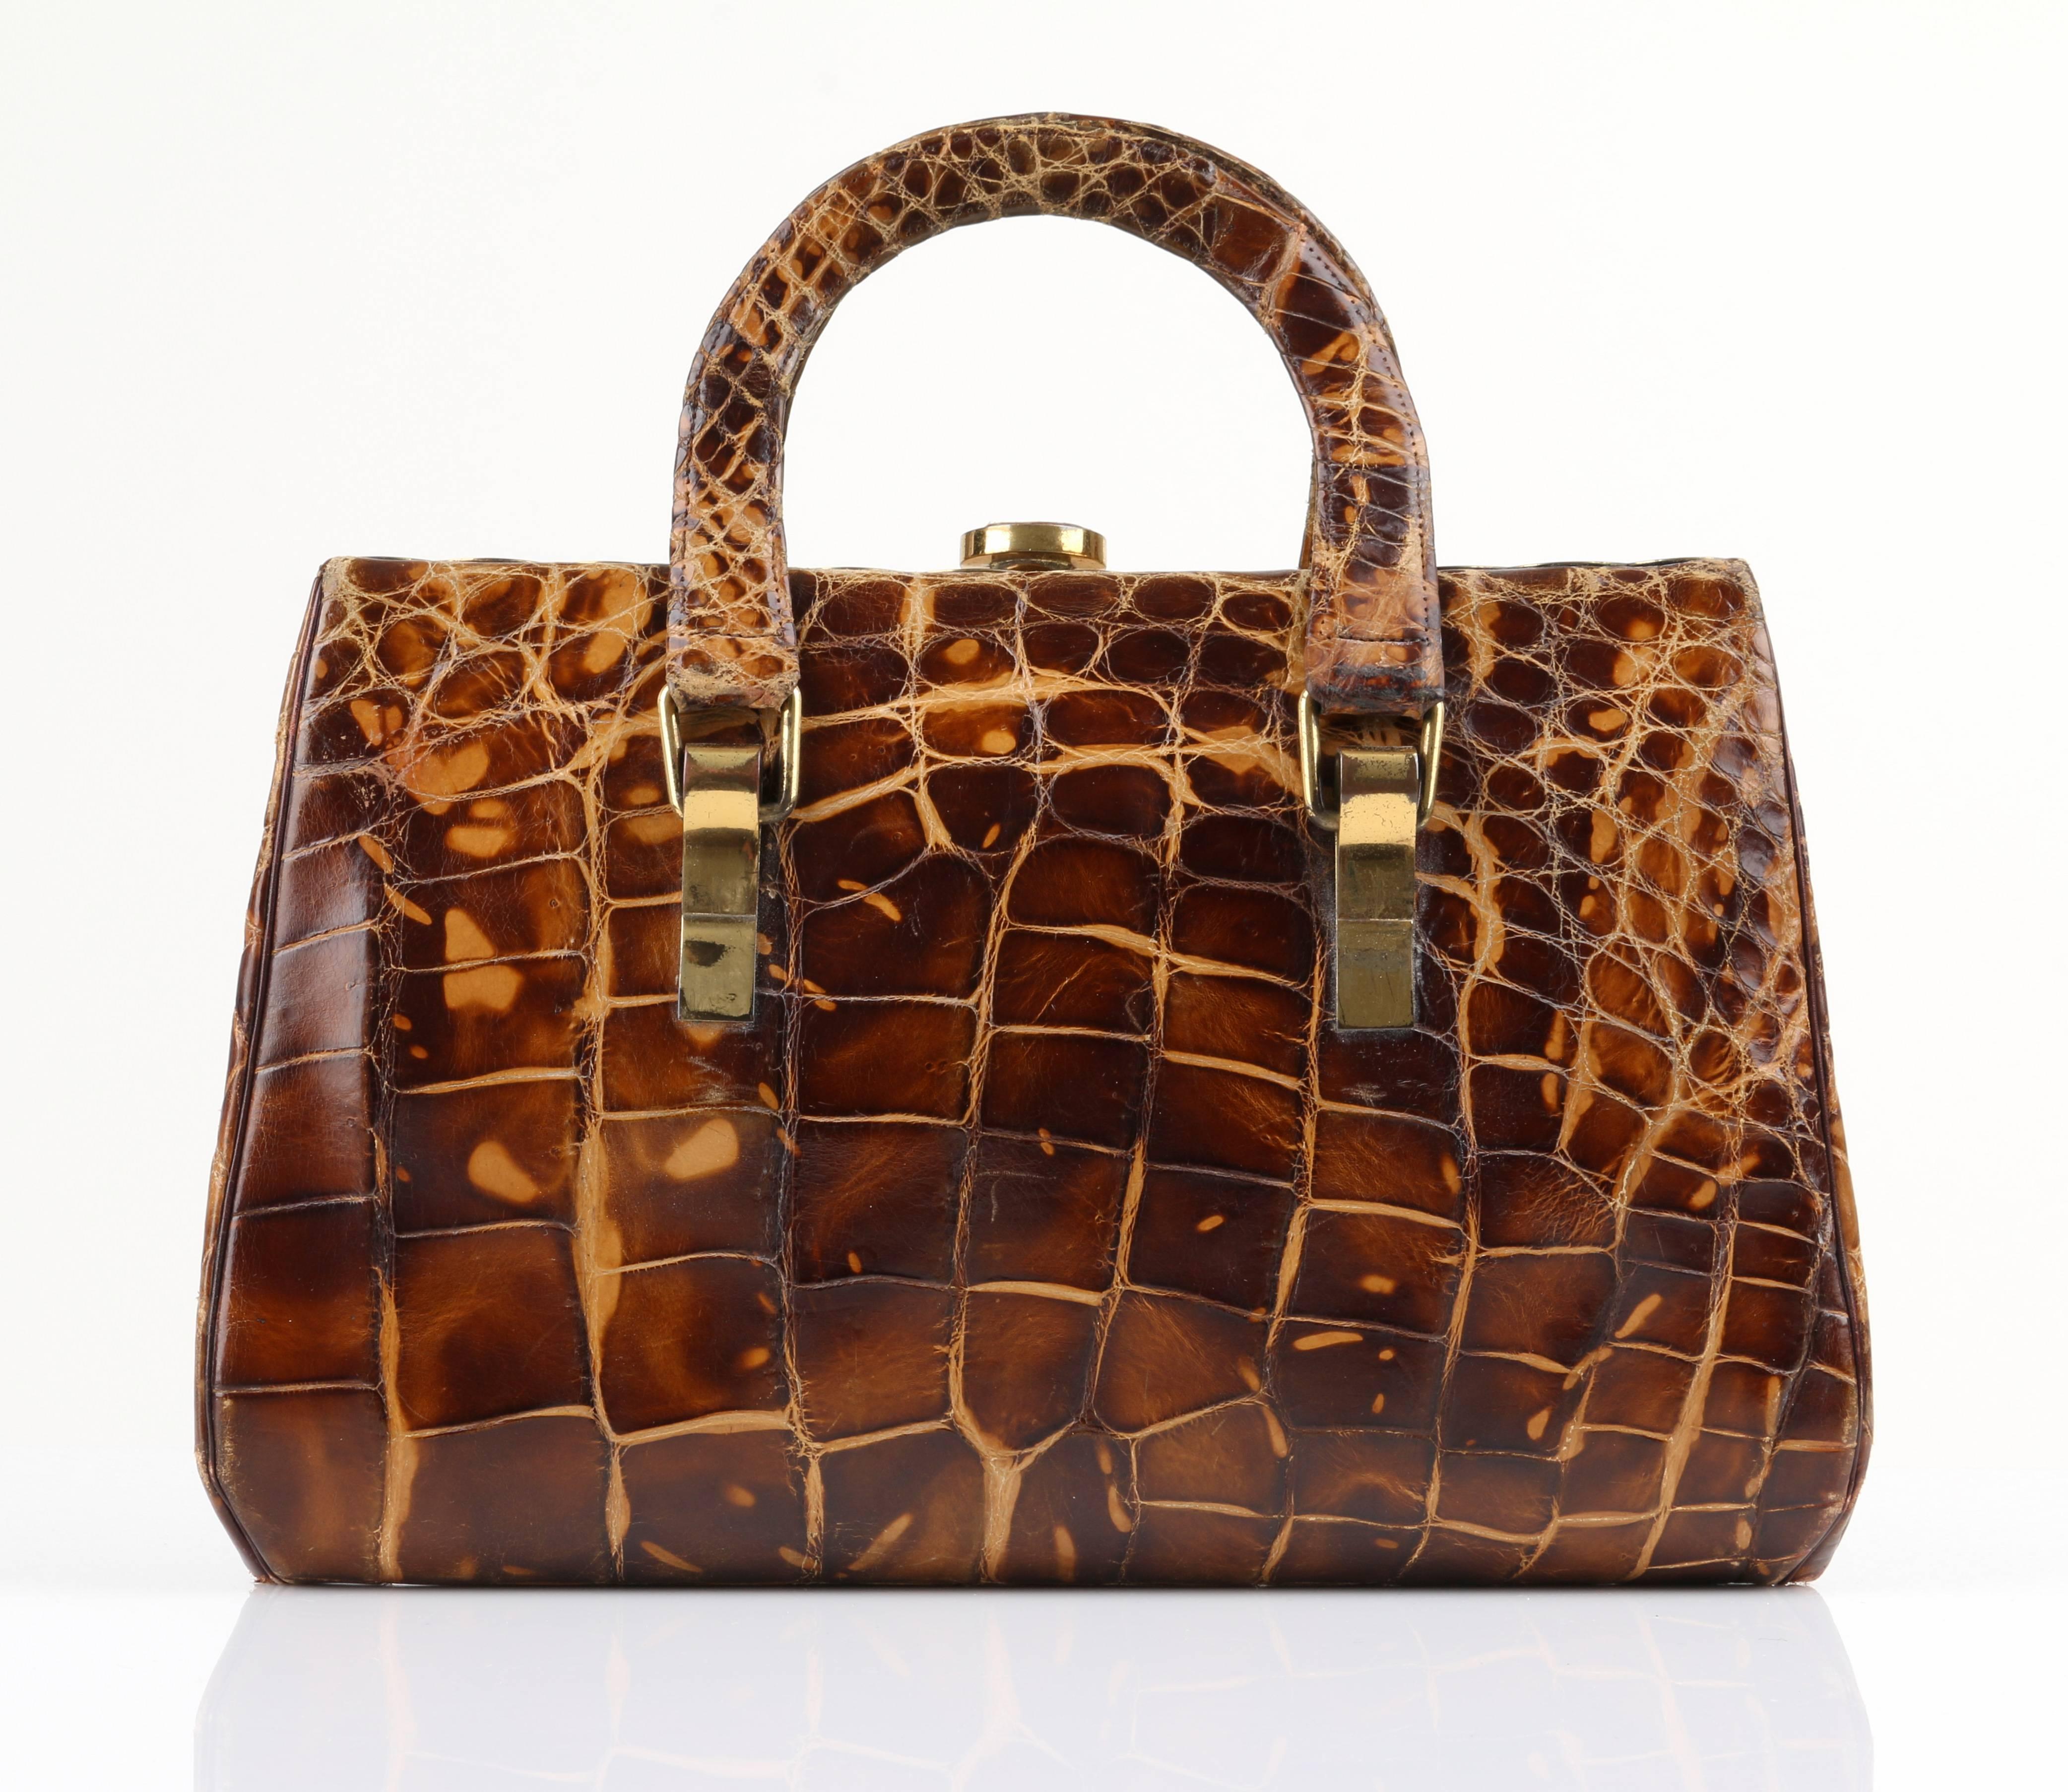 Incredibly Rare Vintage 1930s Hermès brown genuine alligator handbag. Two handles. Gold-tone metal hinged frame and hardware. Metal and alligator clasp at top. Interior has two main compartments divided at the center by an attached kiss clasp coin